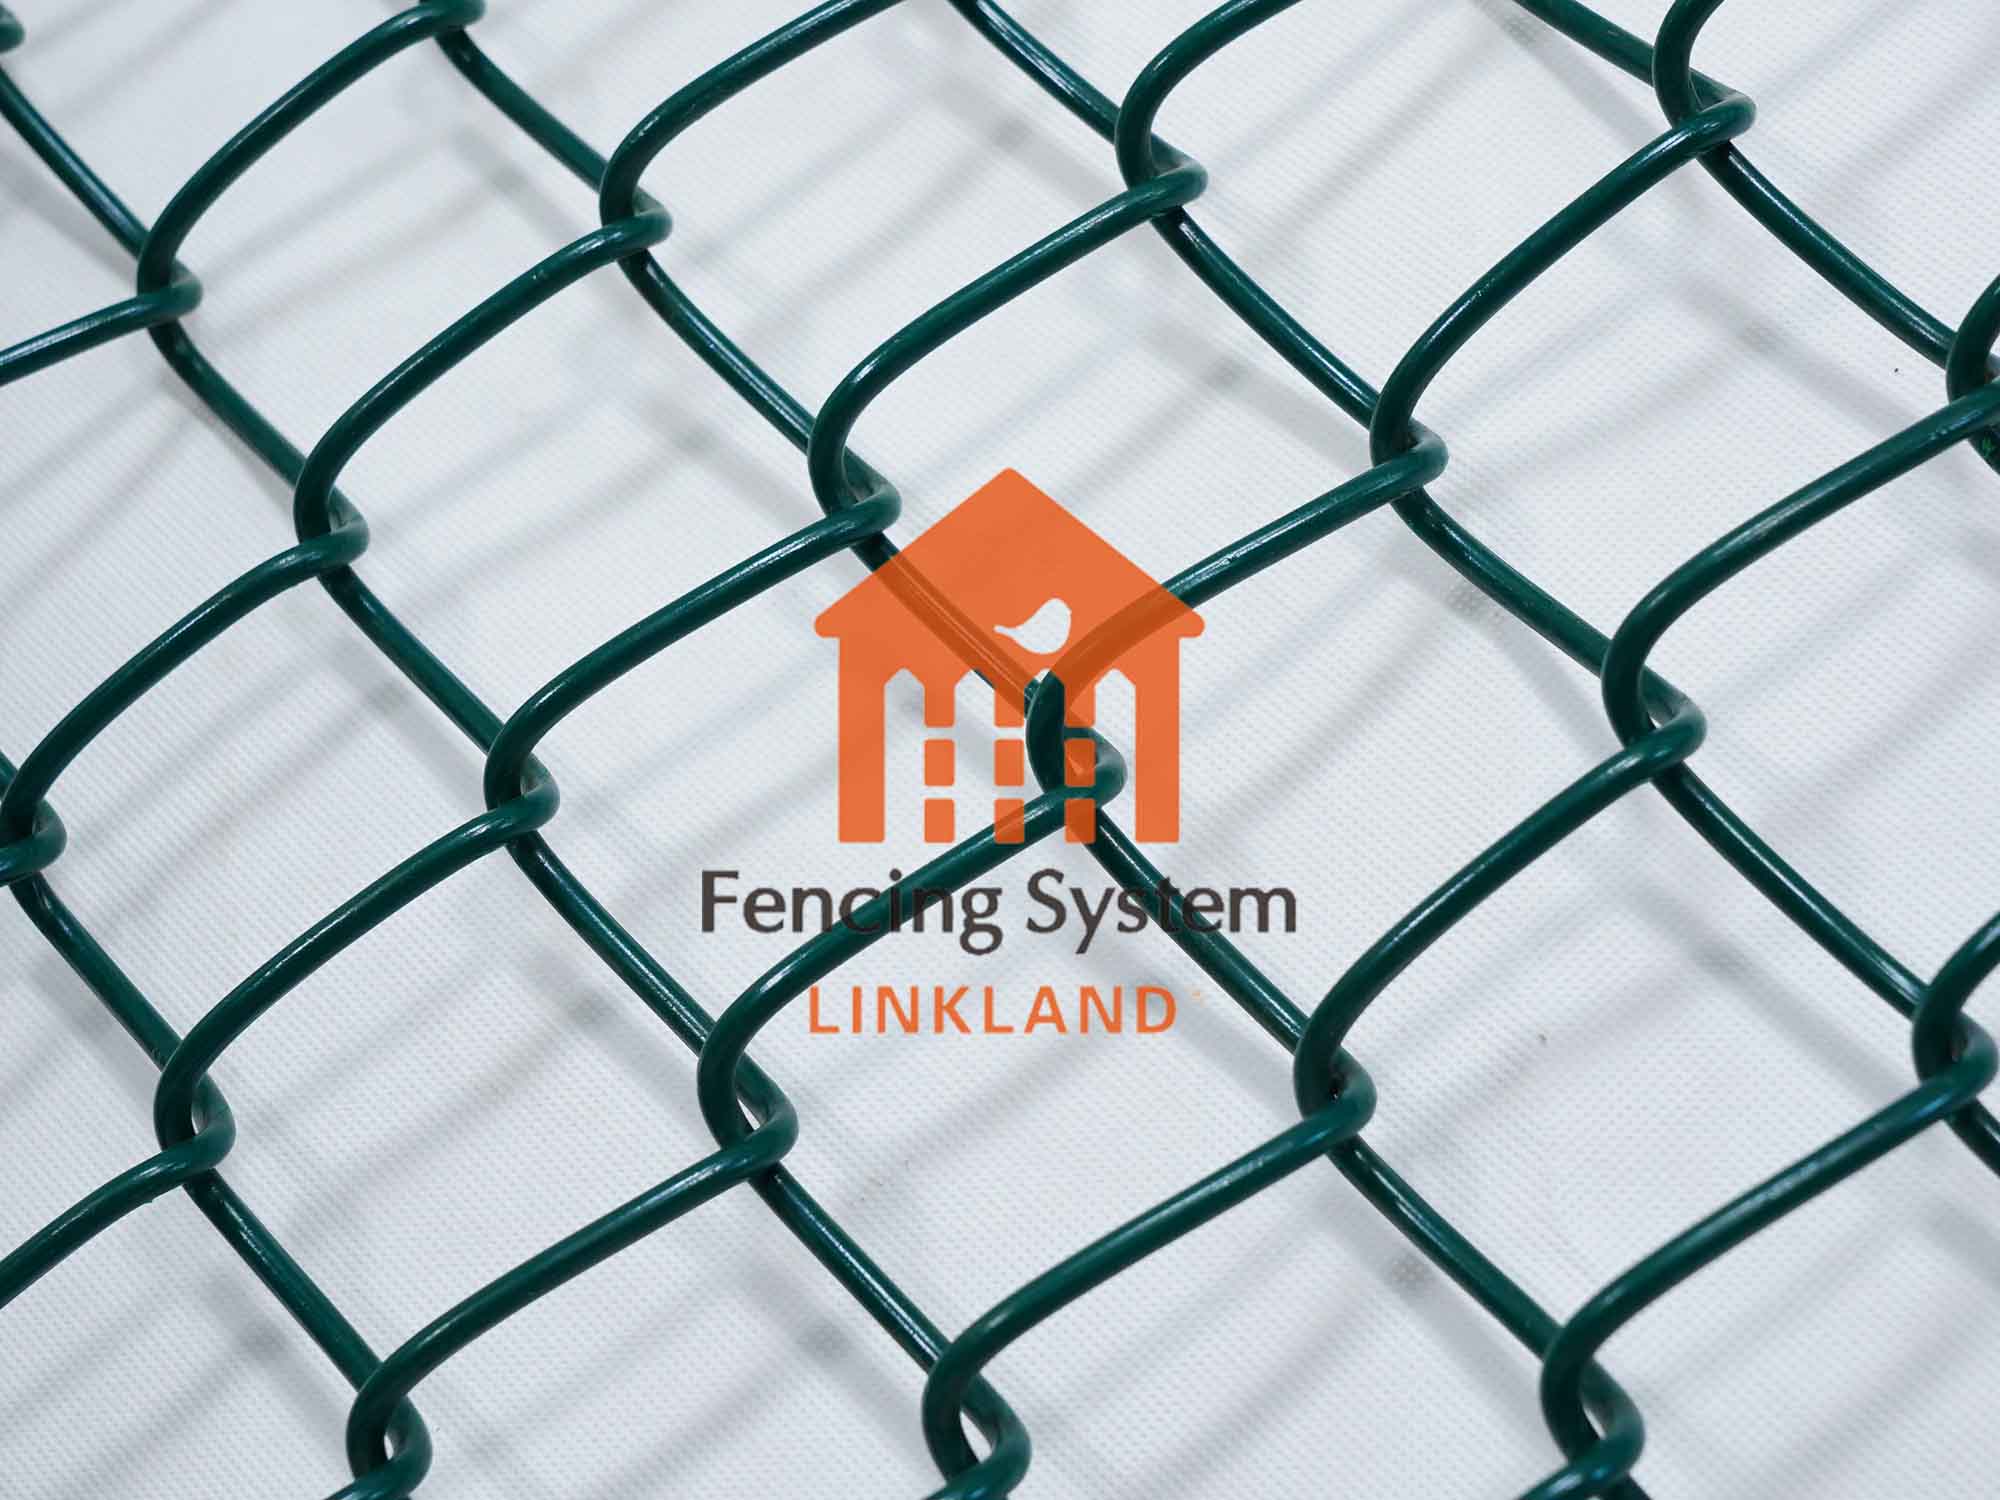 Discussion on the fire performance of Diamond Mesh Fence